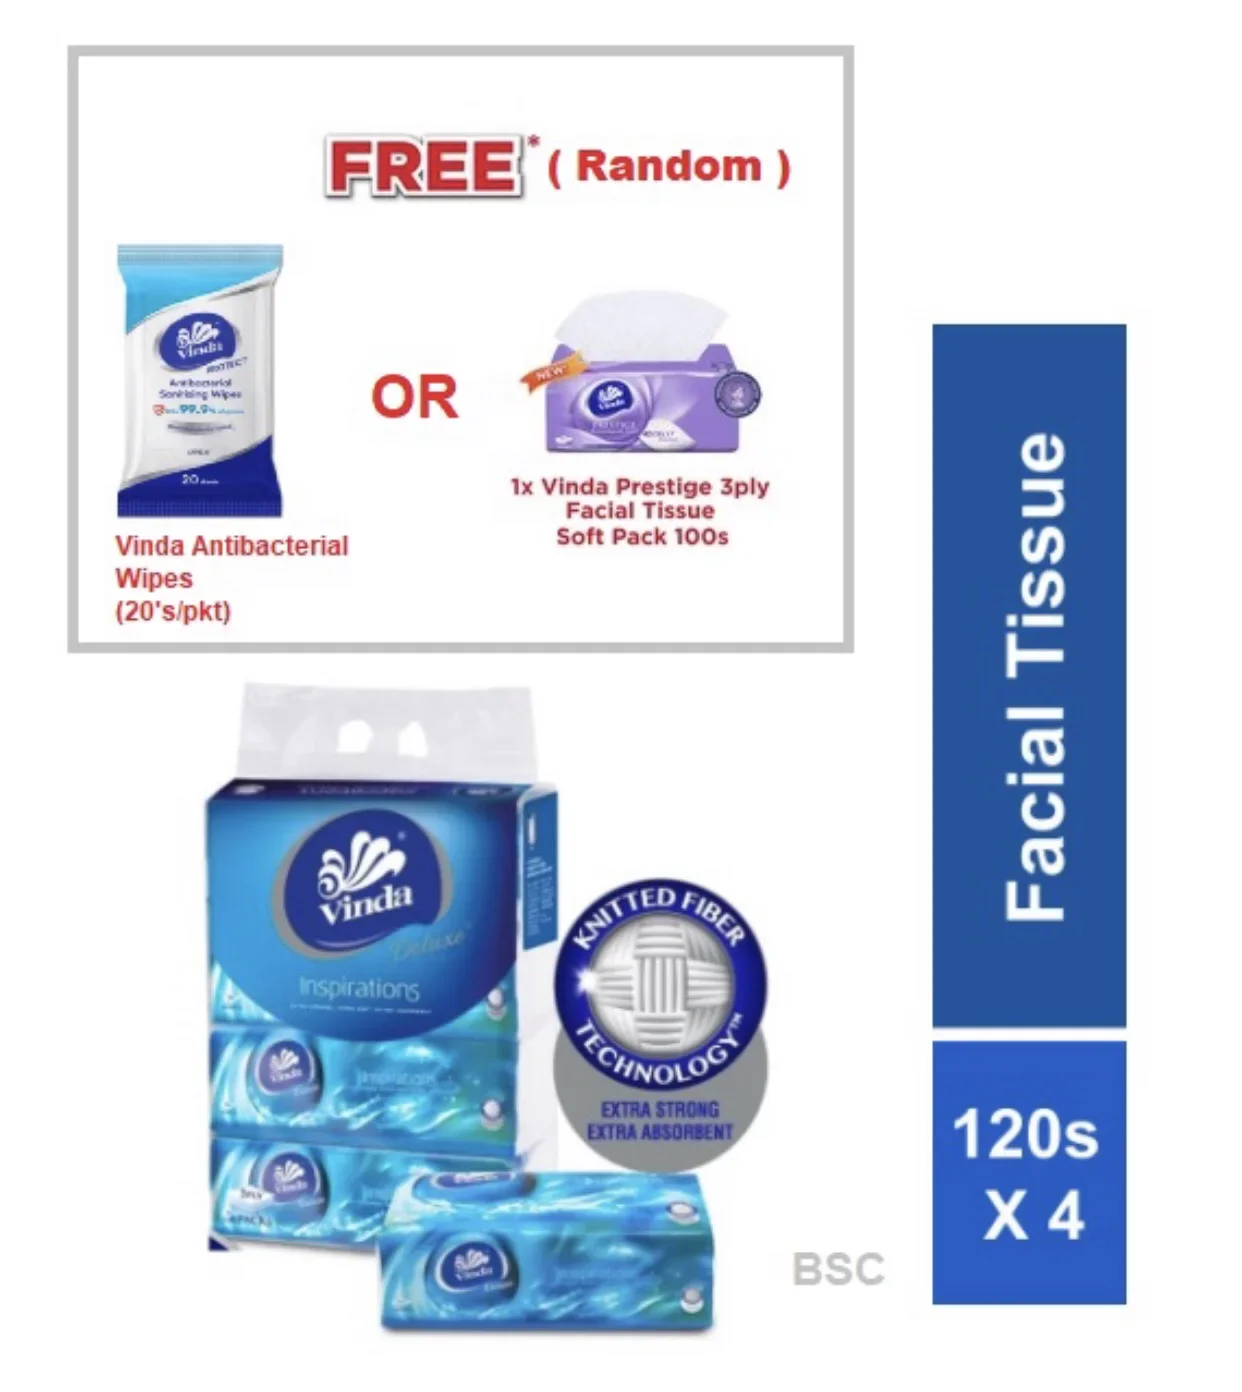 Vinda Deluxe Soft Pack Facial Tissue 3ply 120’s (4pack) + Free 1pack (Wipes Or Tissue)